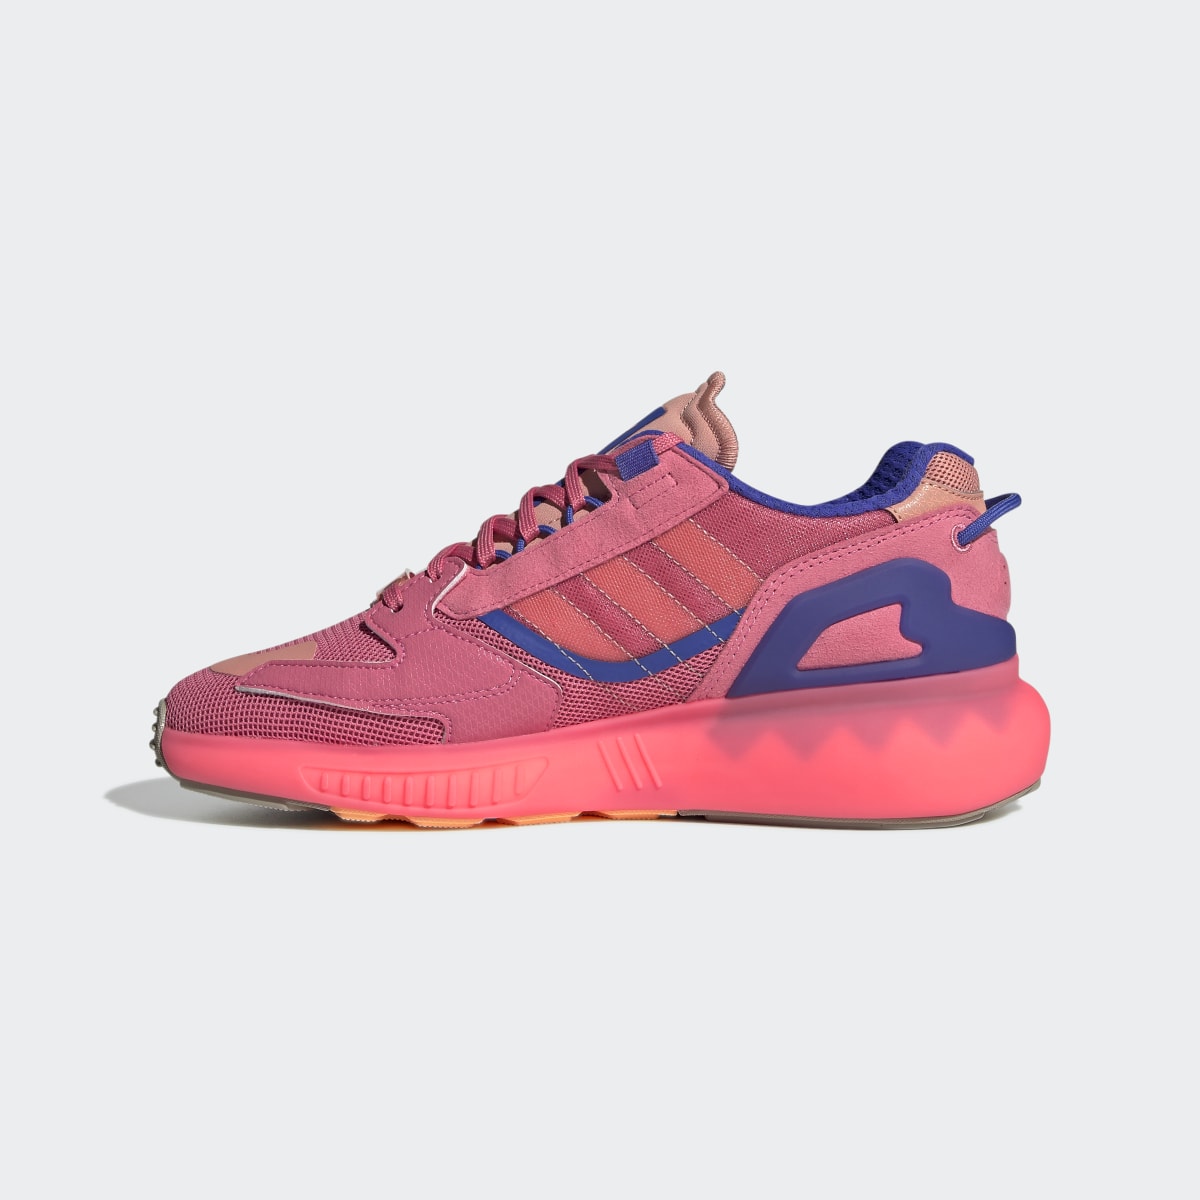 Adidas ZX 5K BOOST Shoes. 10